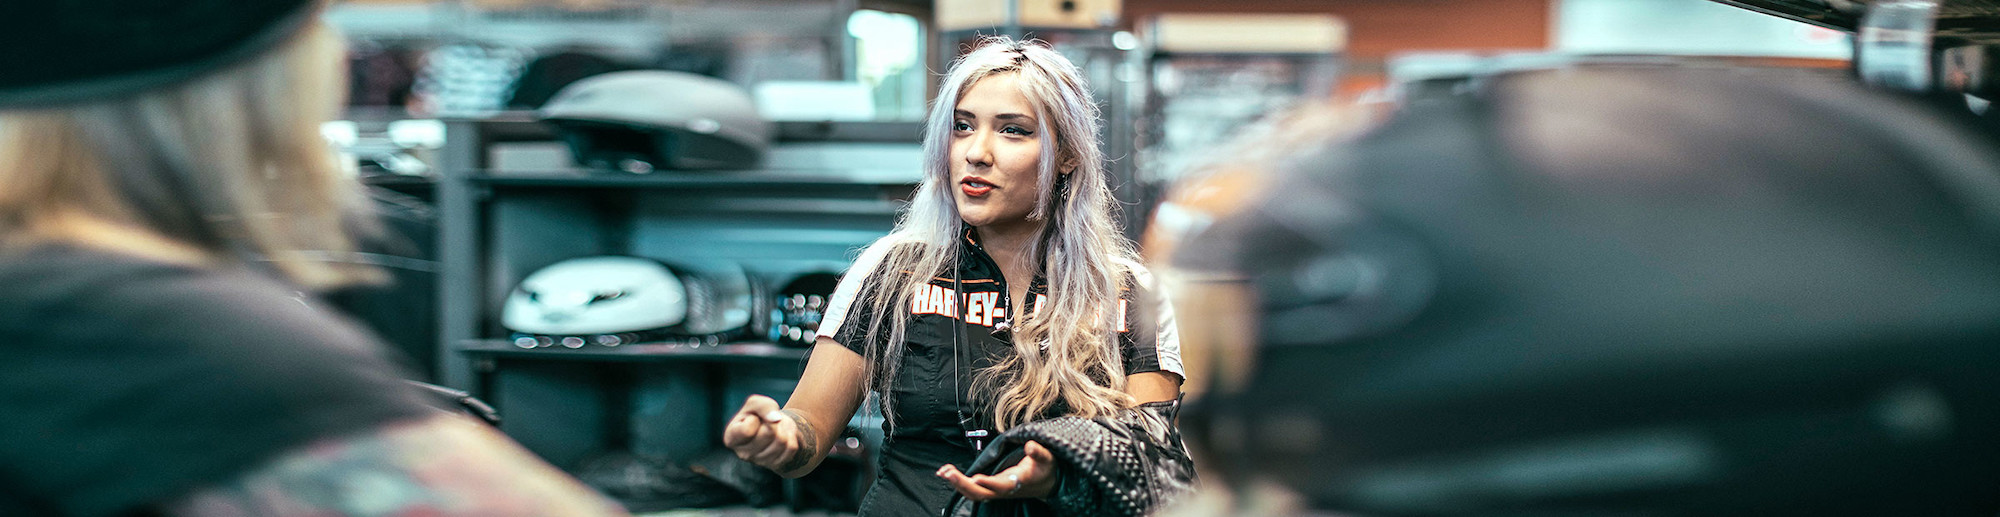 A Harley employee. Media sourced from Four Rivers Harley-Davidson.